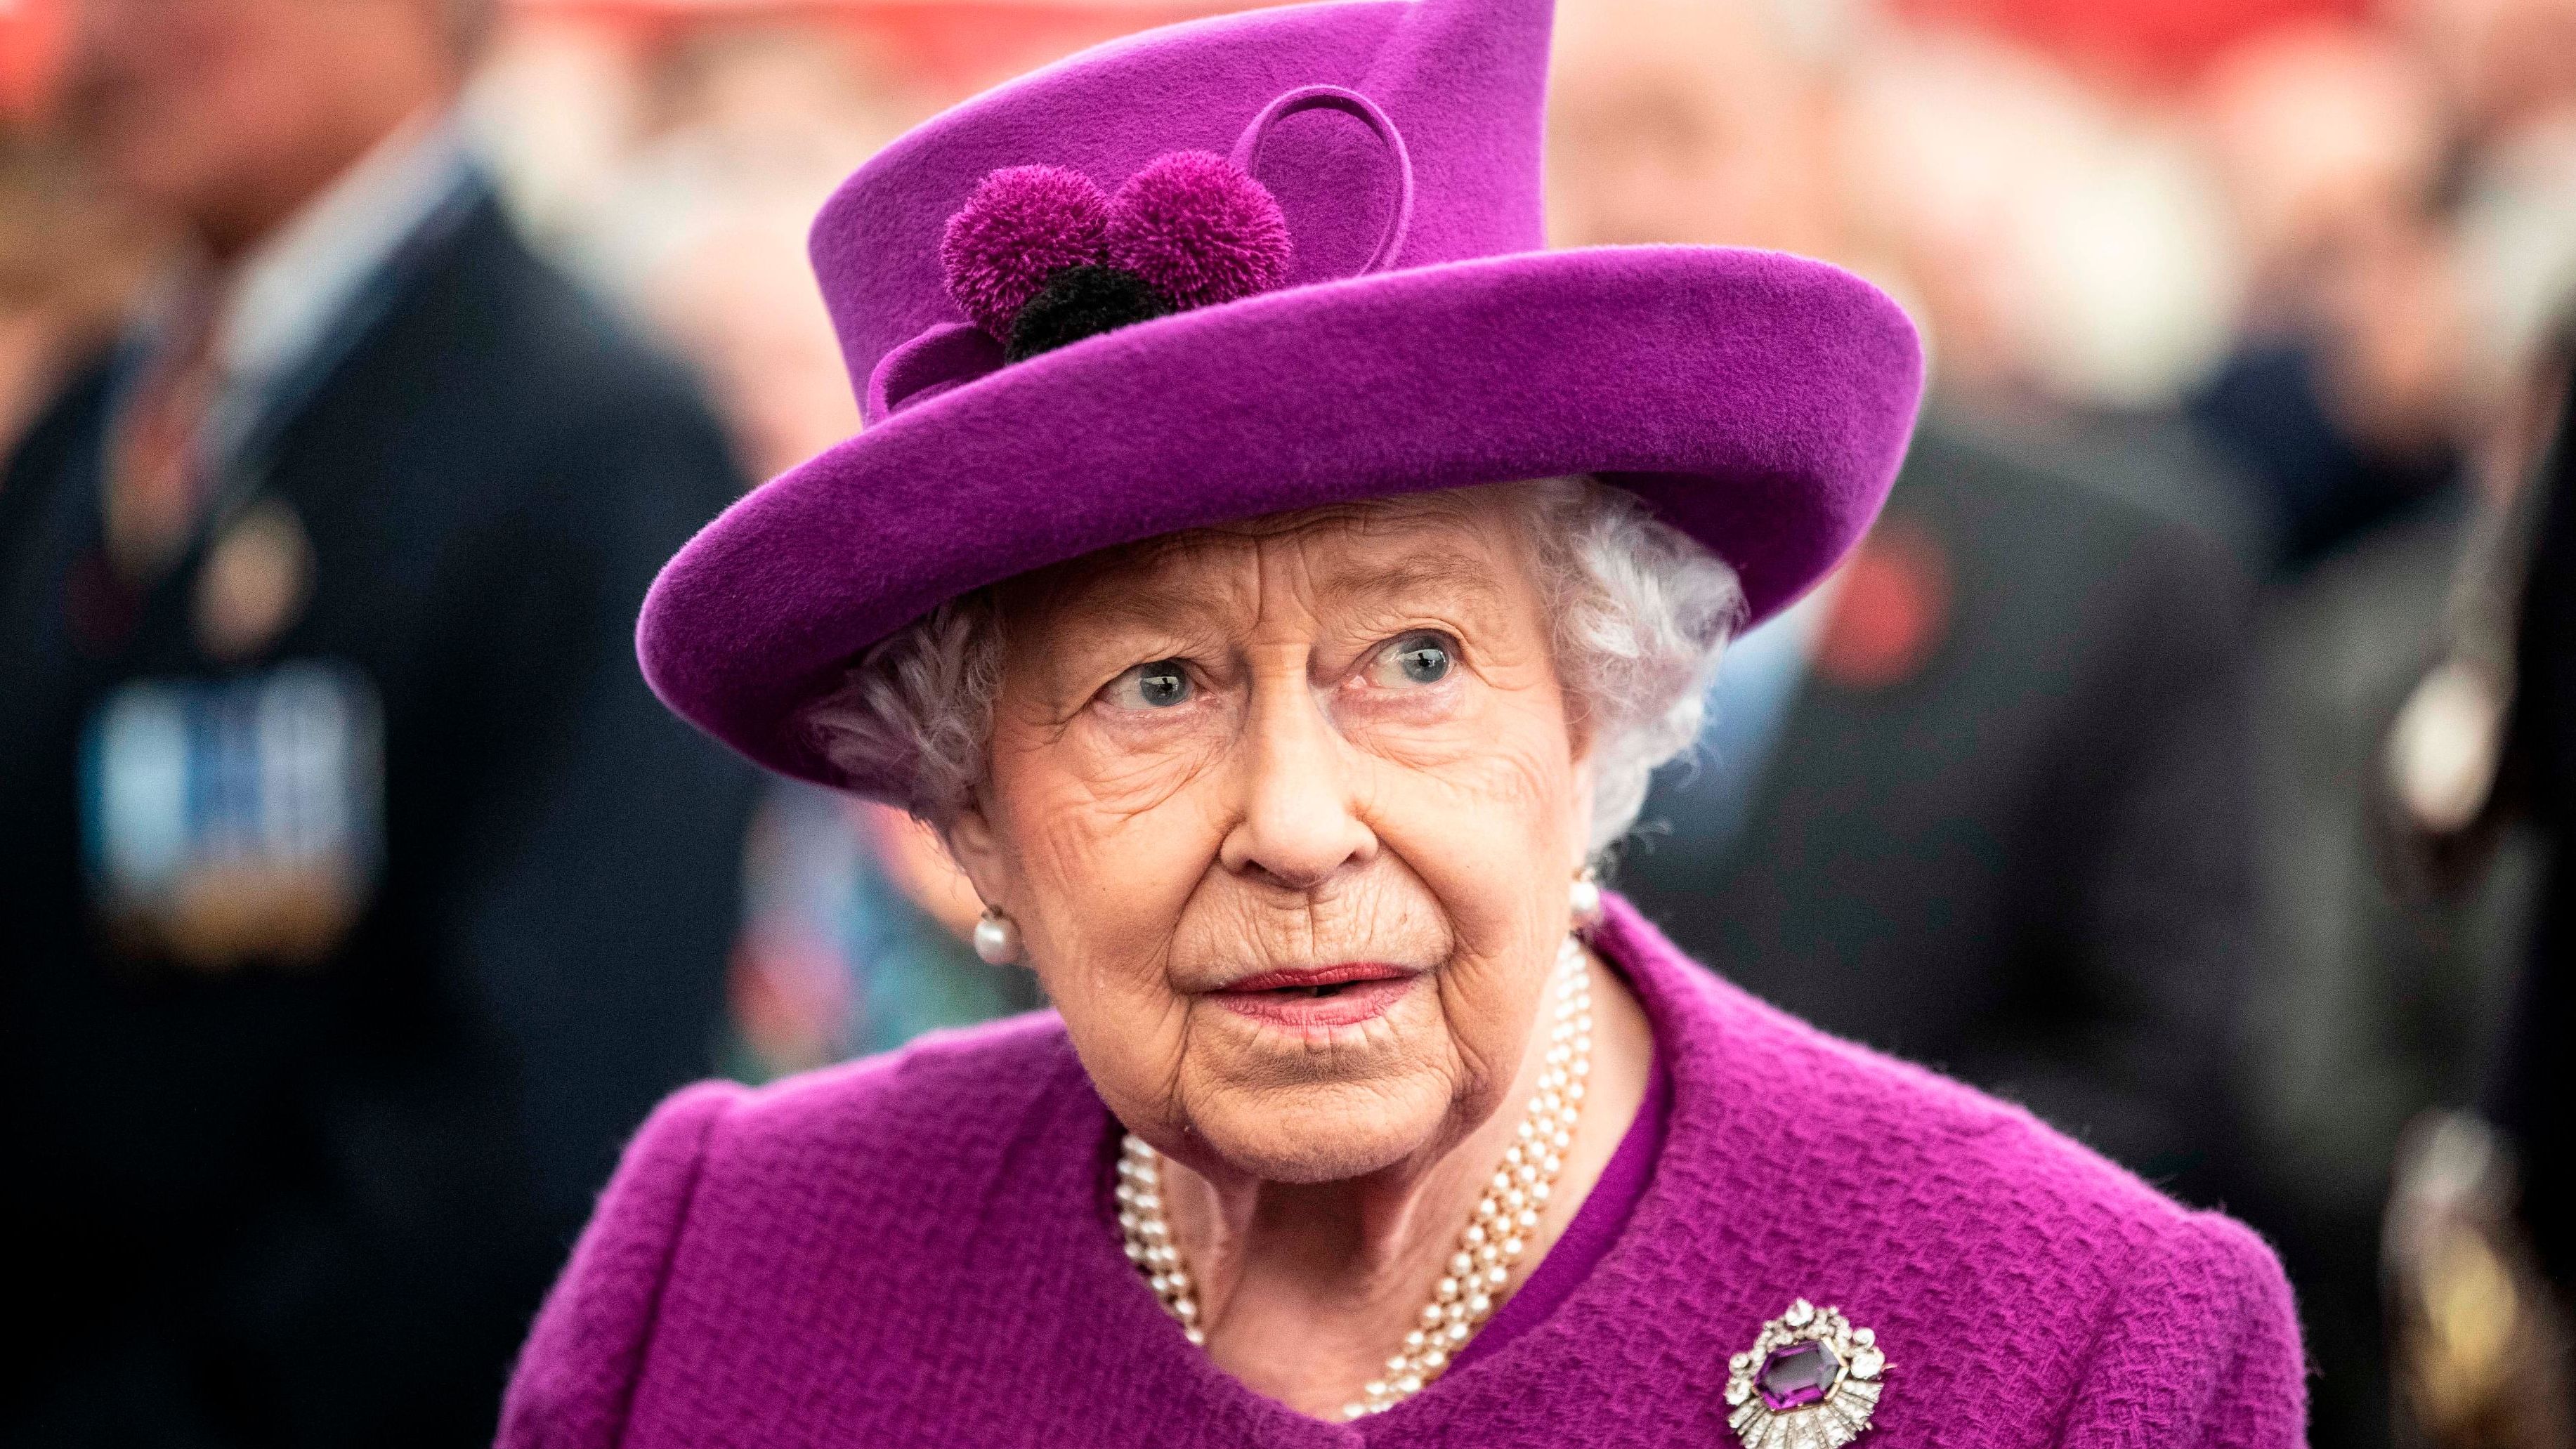 The Queen will travel to Windsor Castle a week earlier than previously planned.